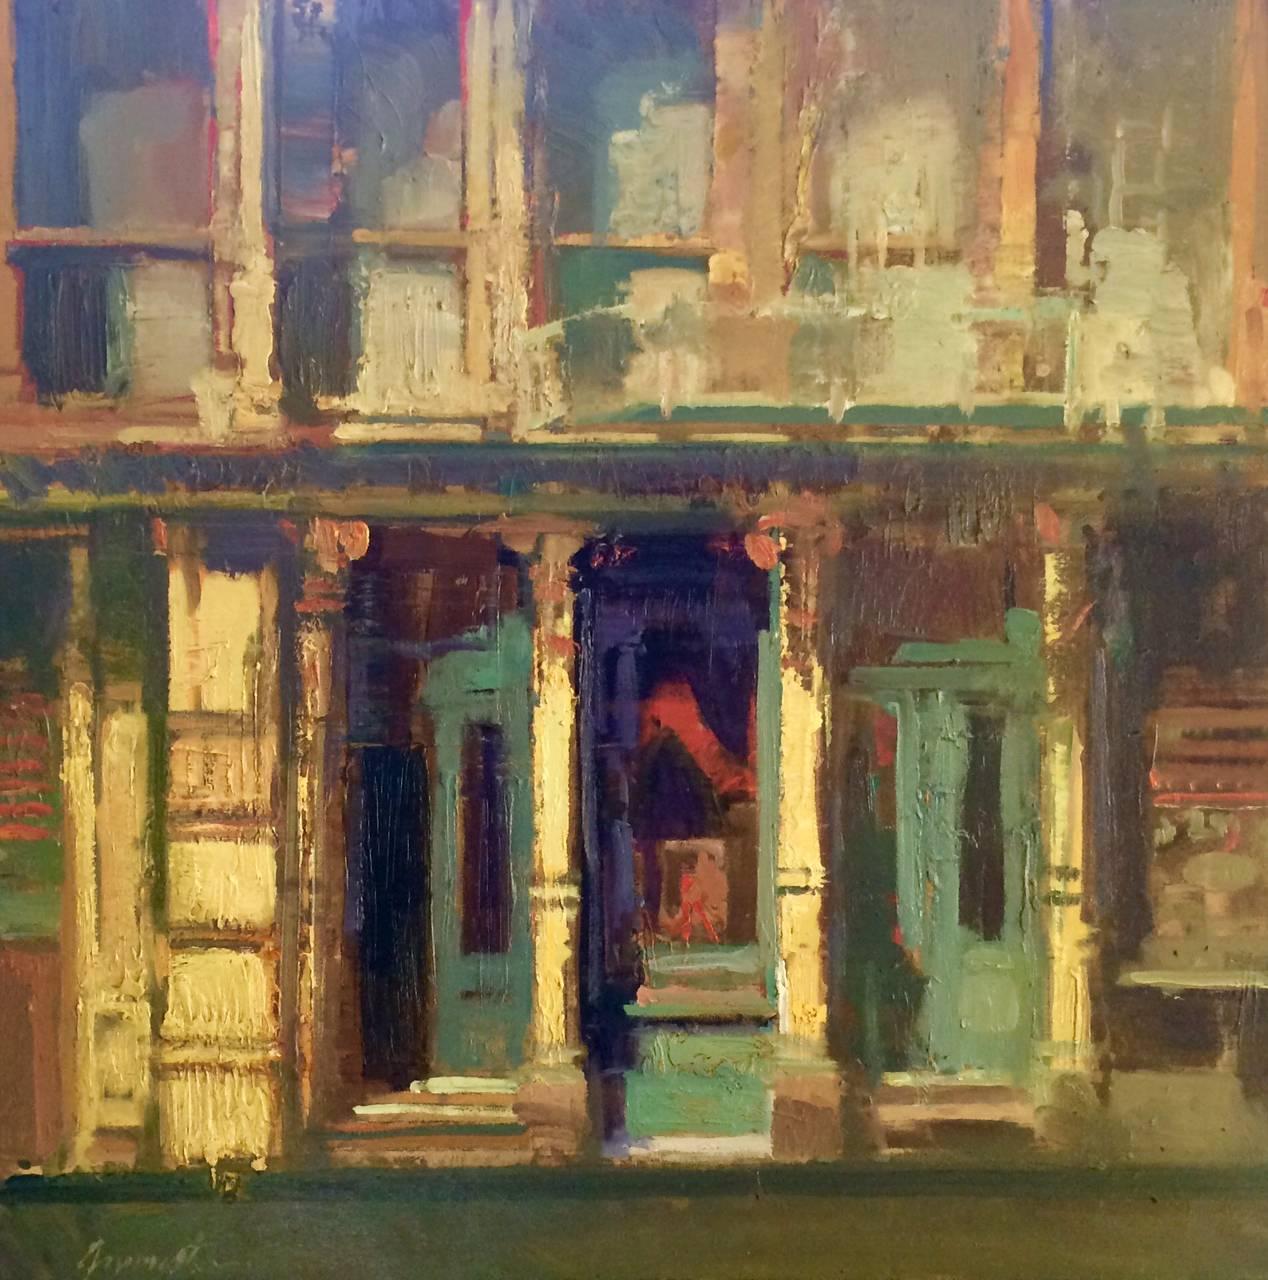 GREEN DOORS - Painting by Francis Livingston